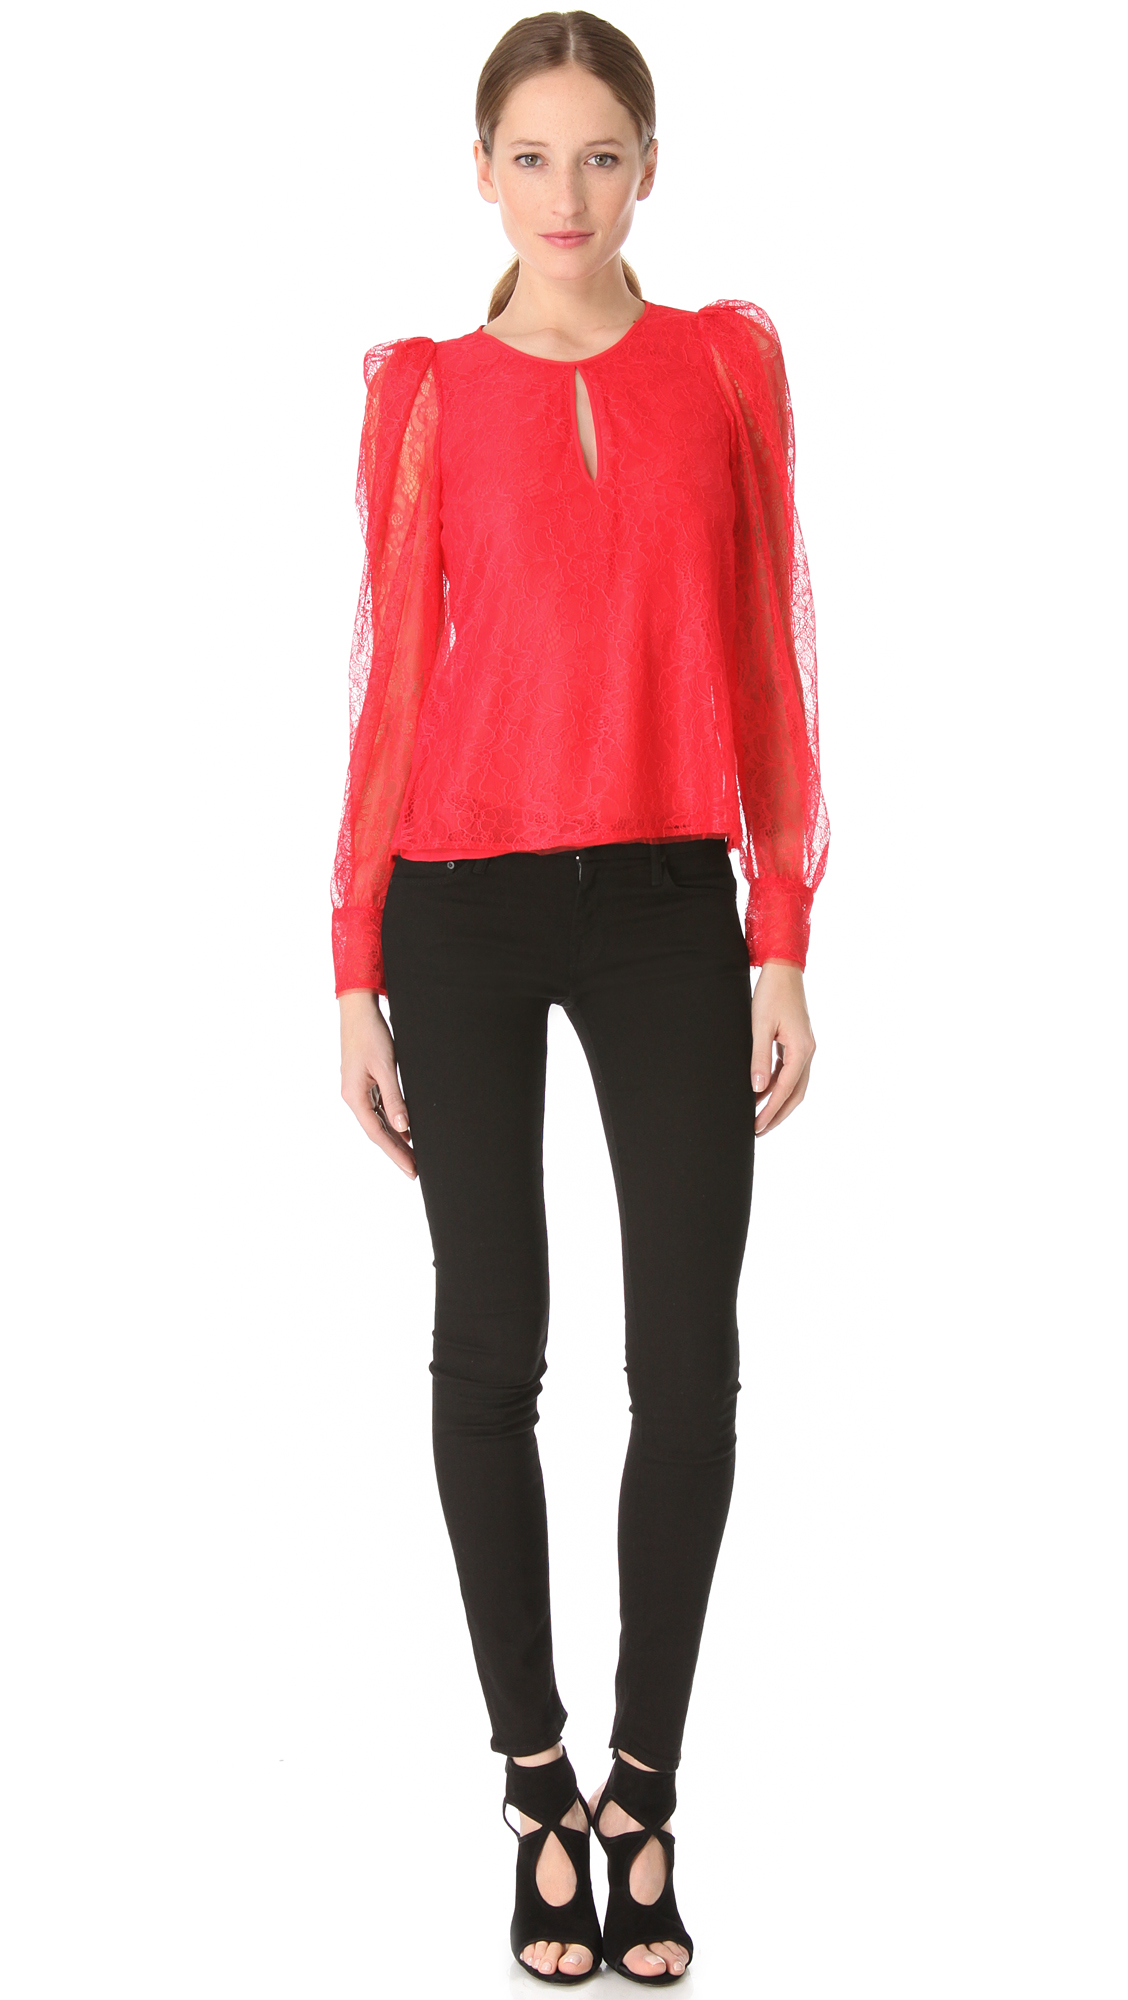 Lyst - Bcbgmaxazria Blouse Lace Blouse with Front Keyhole in Red